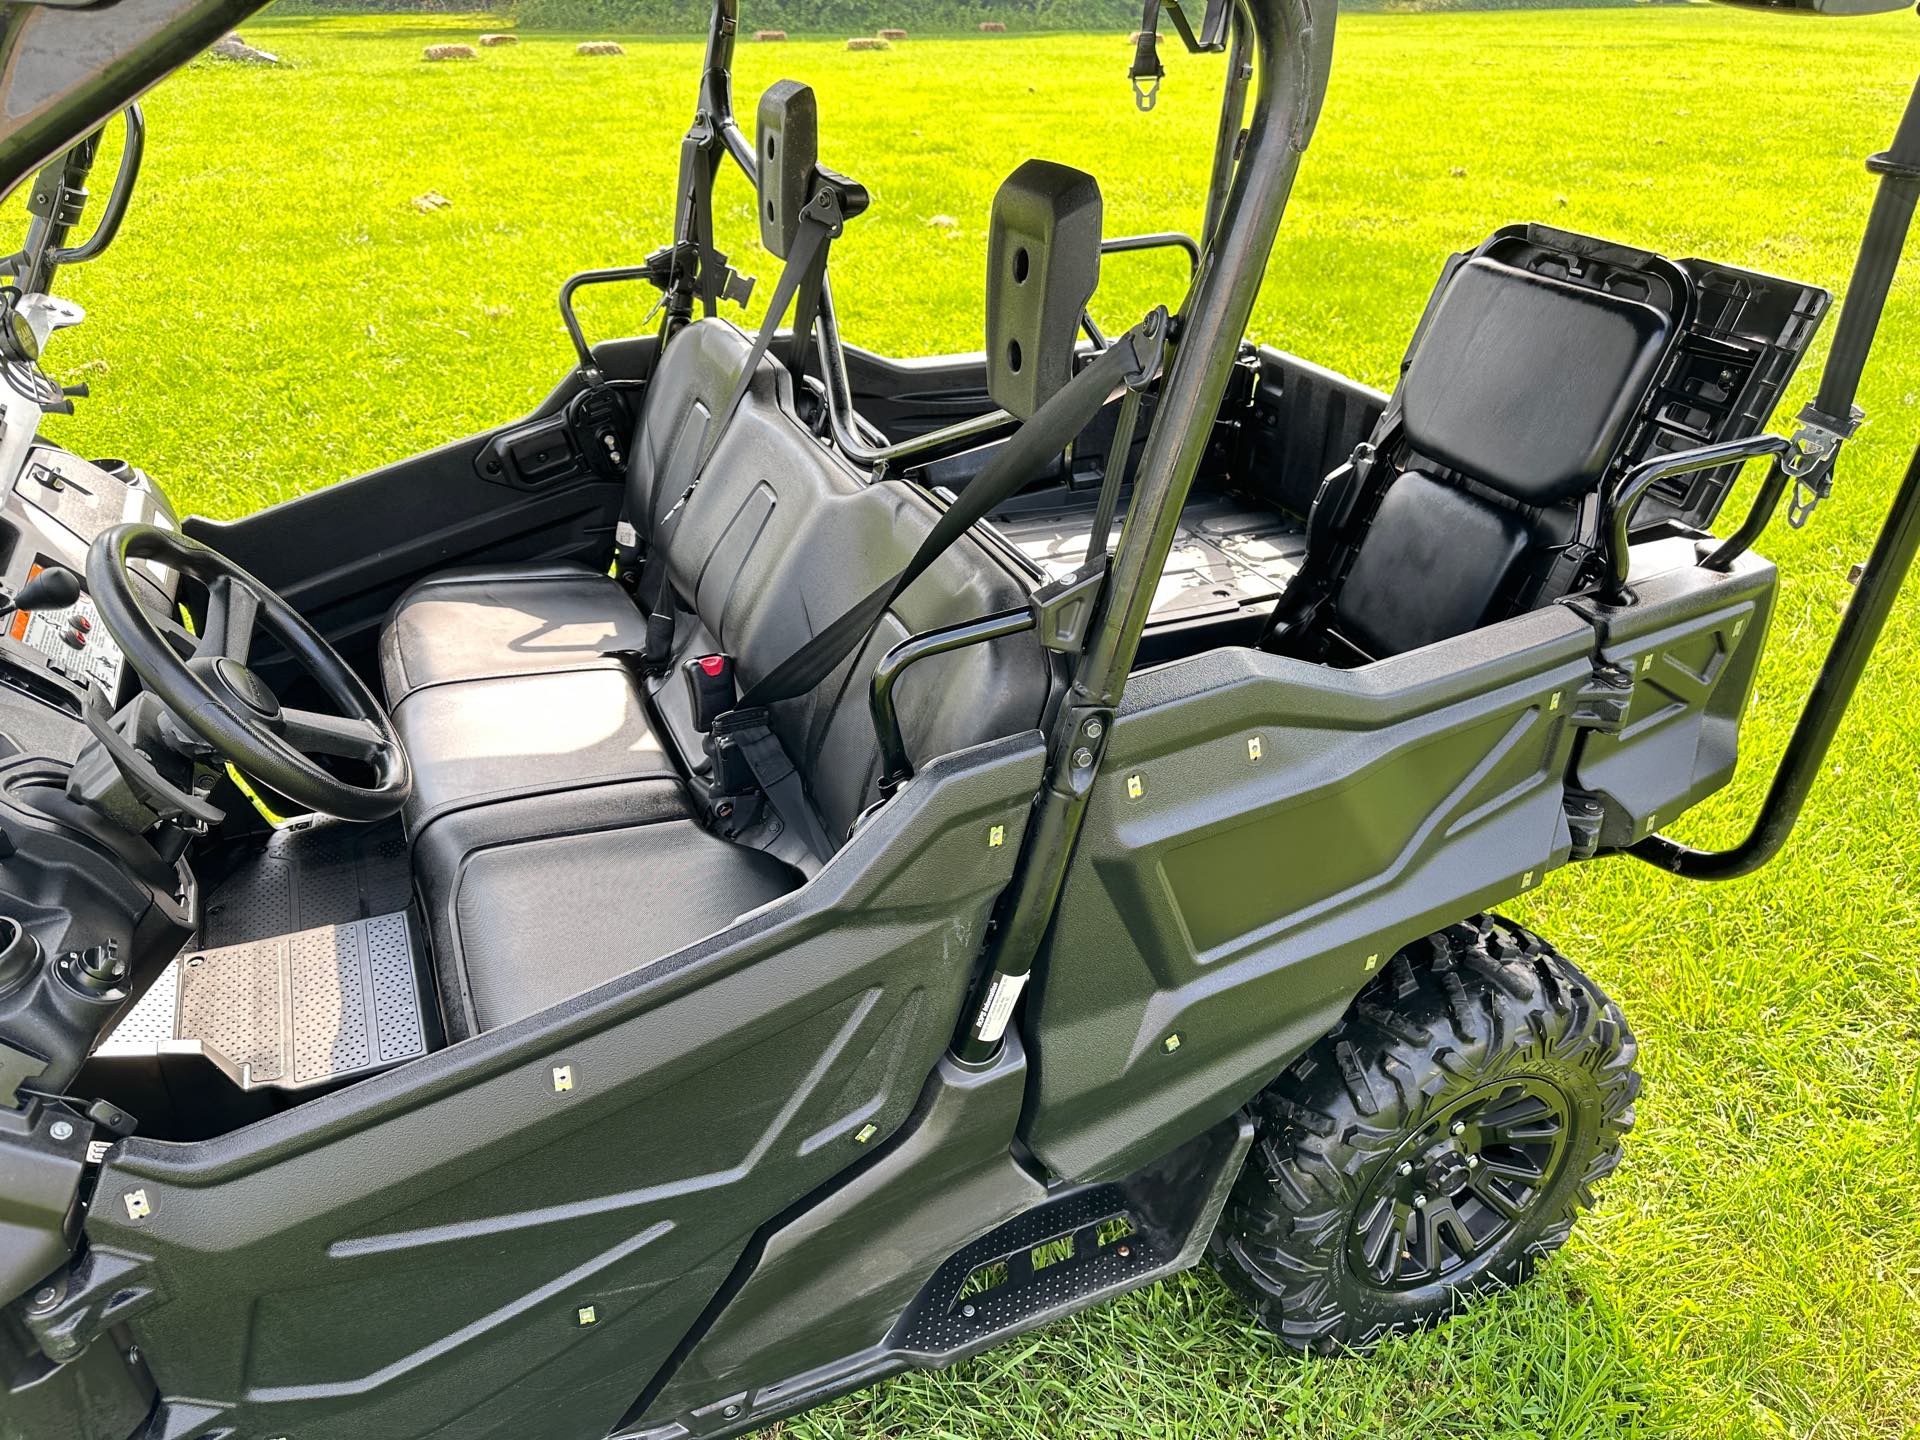 2021 Honda Pioneer 1000-5 Deluxe at ATVs and More